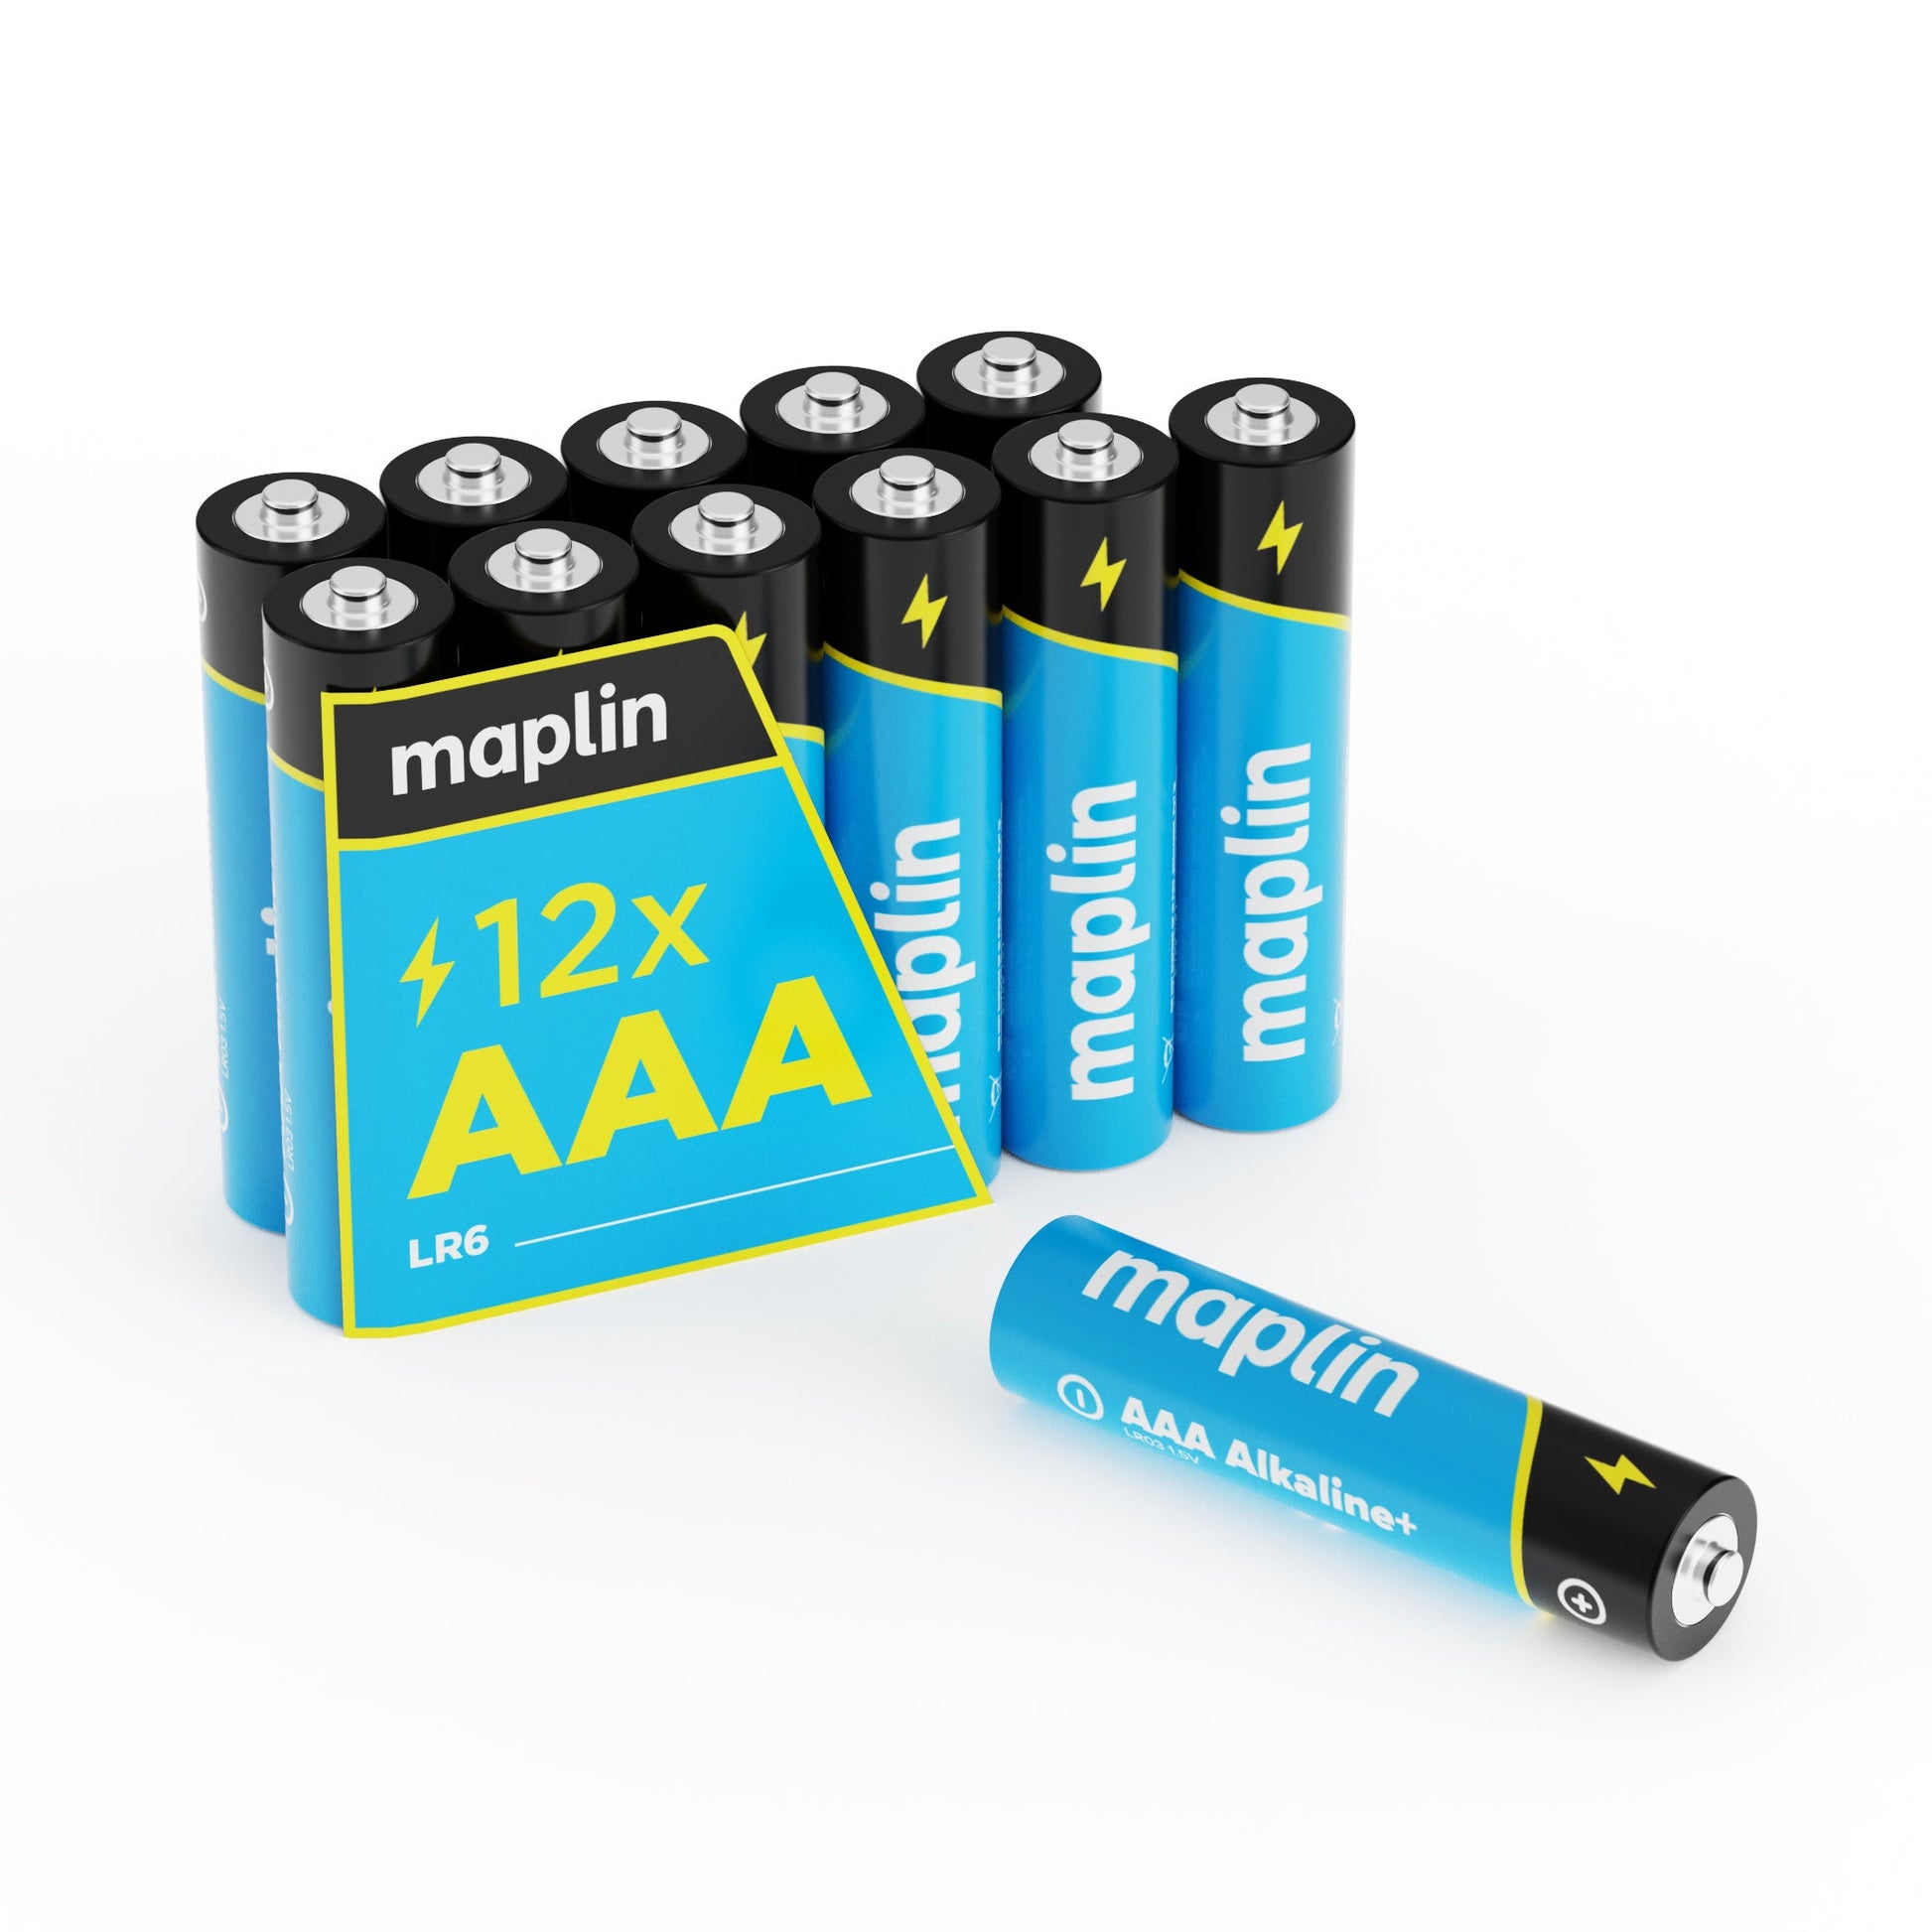 AAA Battery: Everything You Need To Know